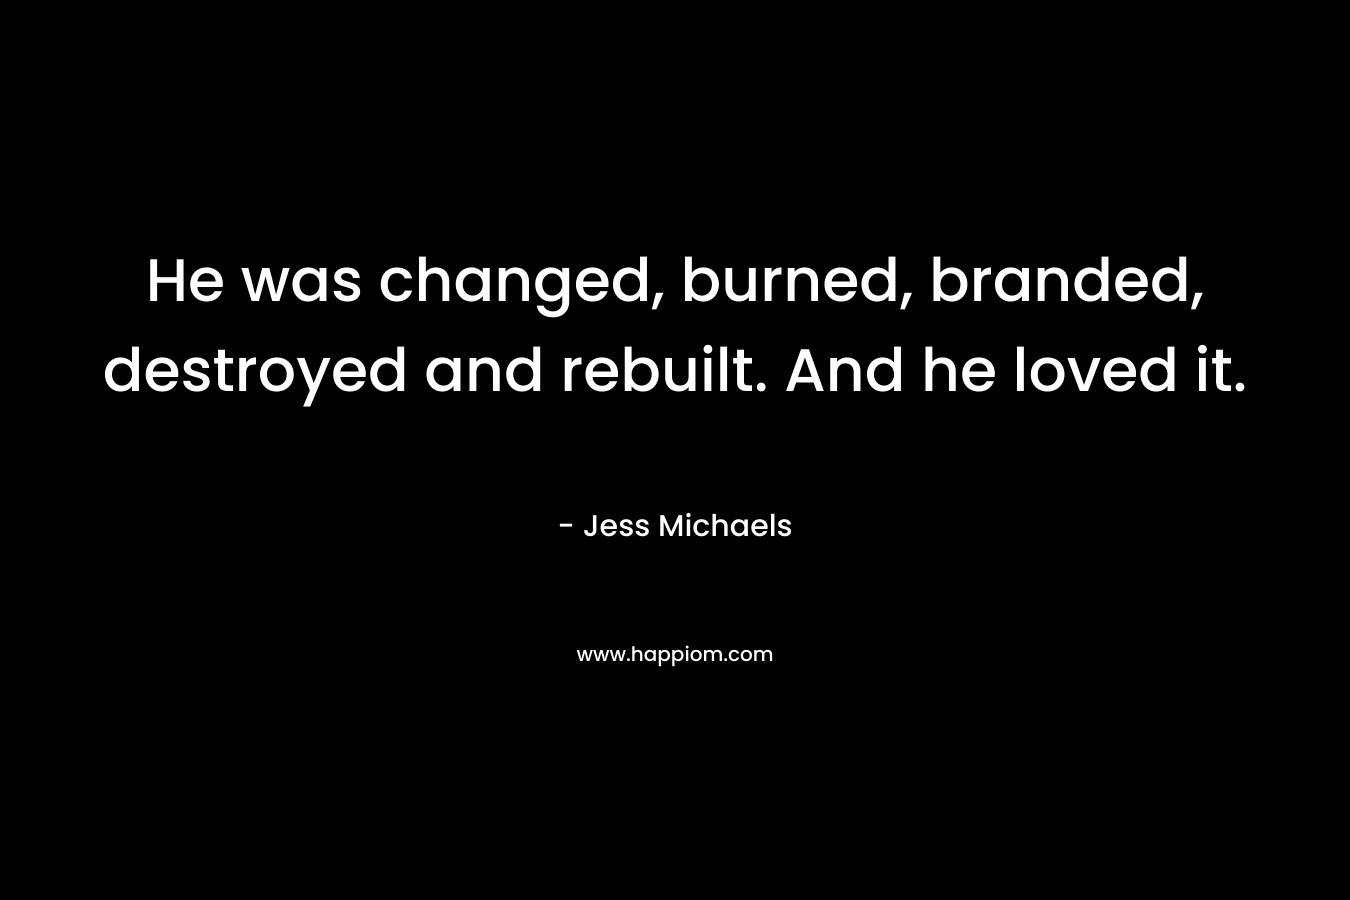 He was changed, burned, branded, destroyed and rebuilt. And he loved it.